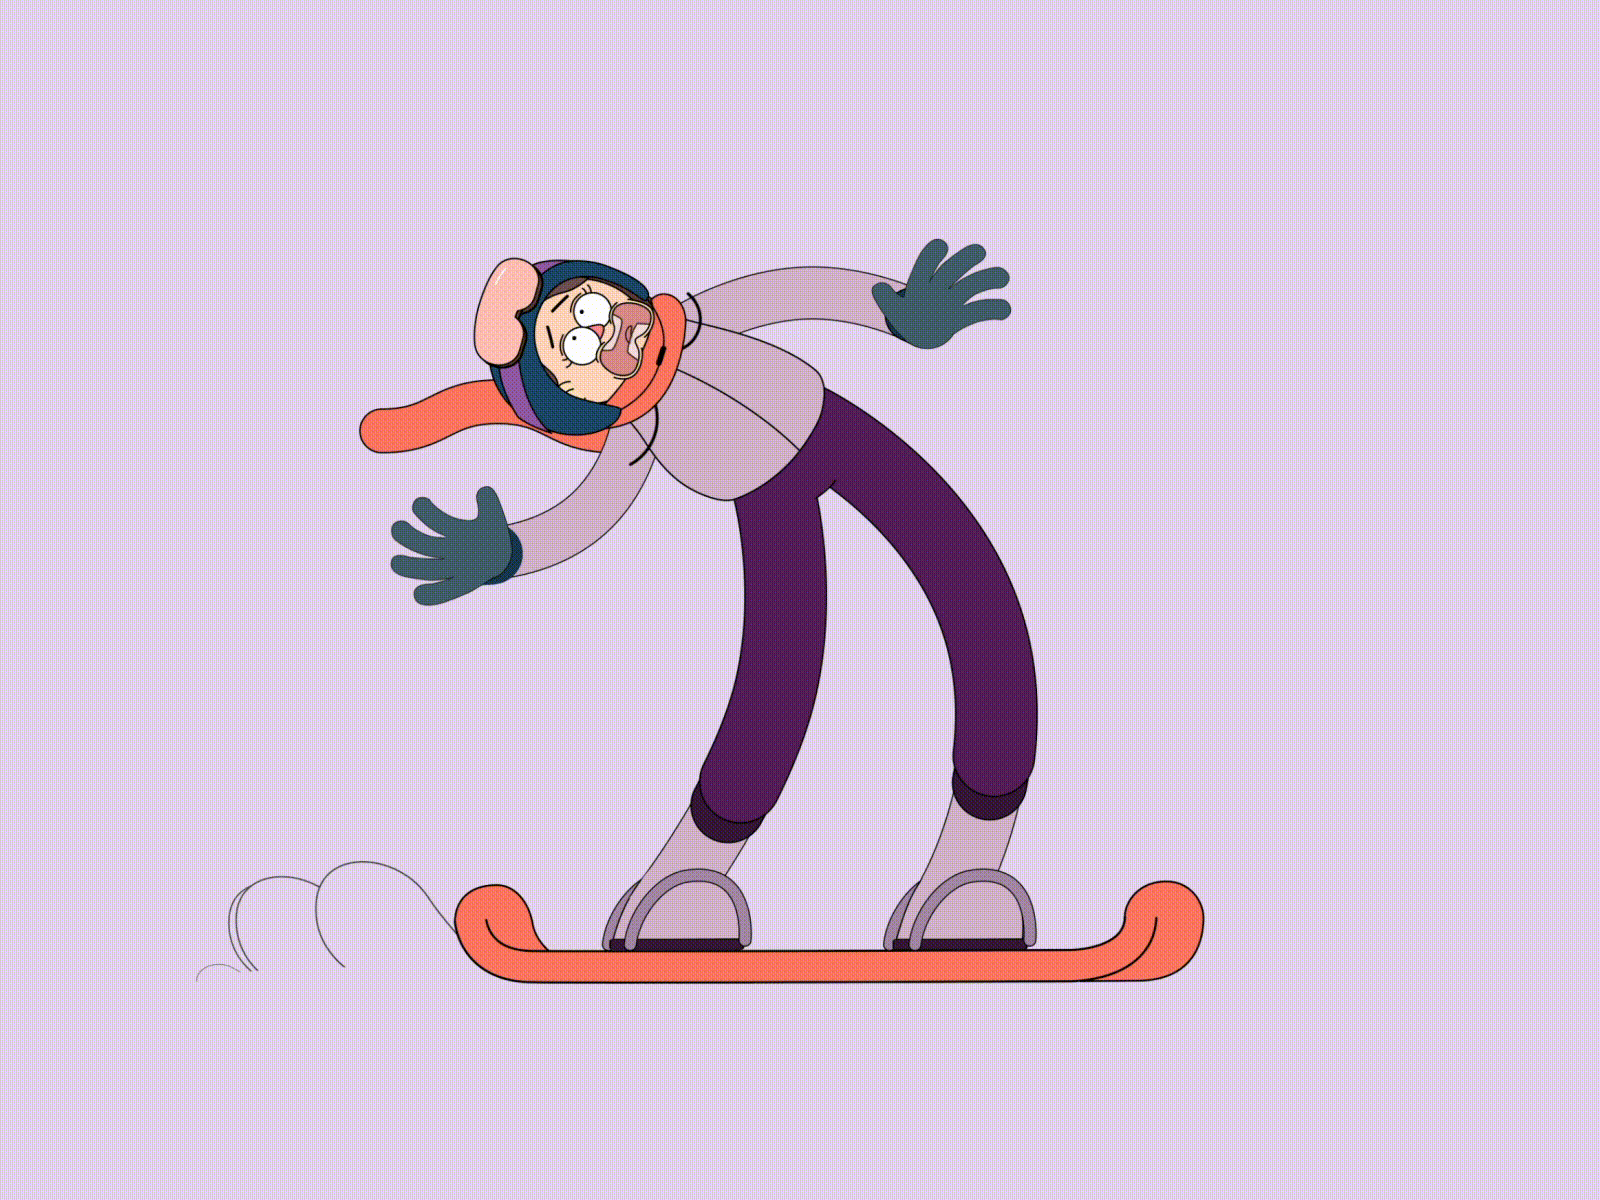 Snowboard after effects animation animation 2d character animation gif illustration inspiration mograph motion motiondesign motiongraphics muzli snowboard snowboarding